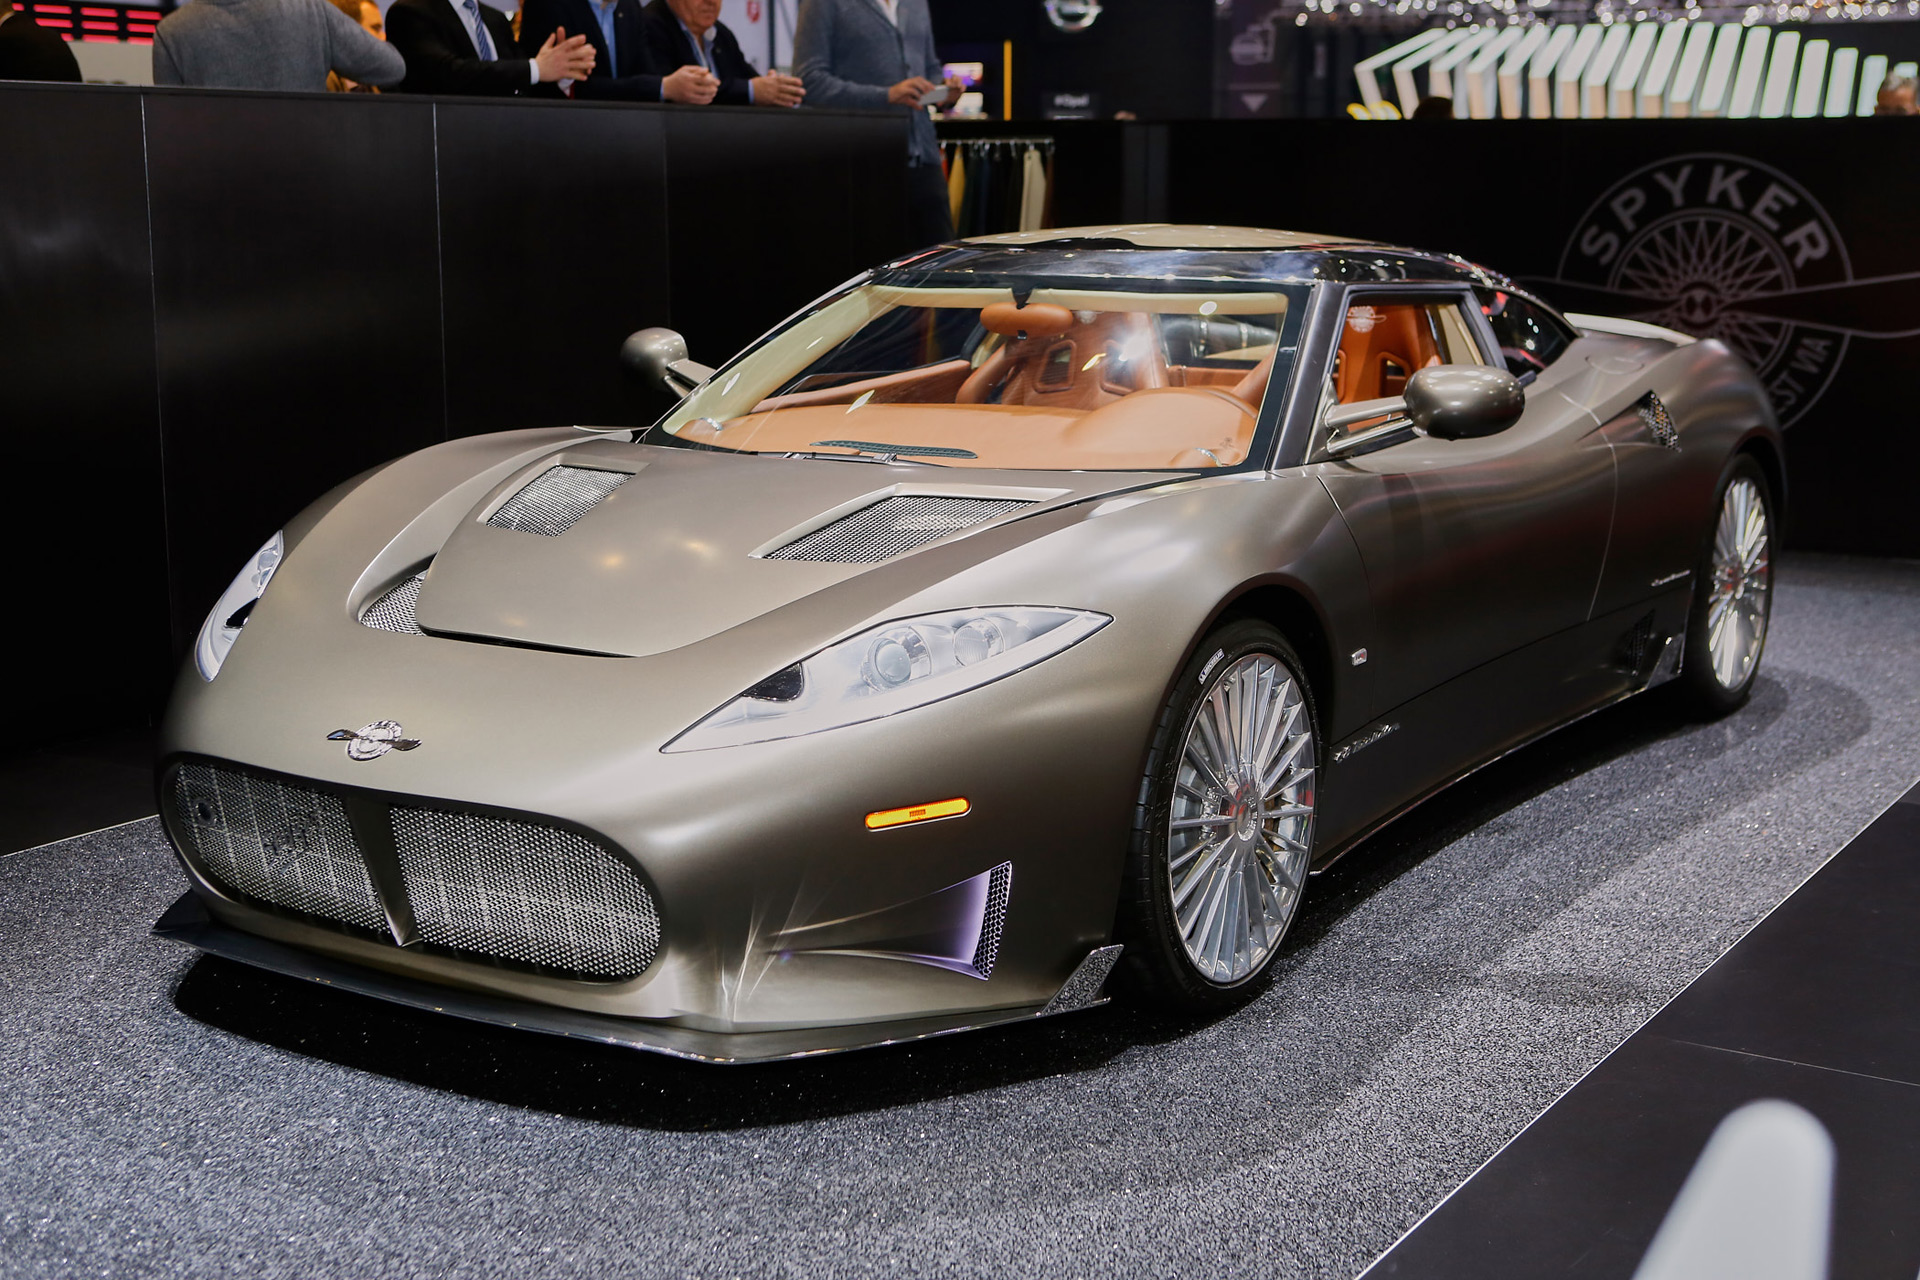 Spyker C8 Preliator priced from $354,990